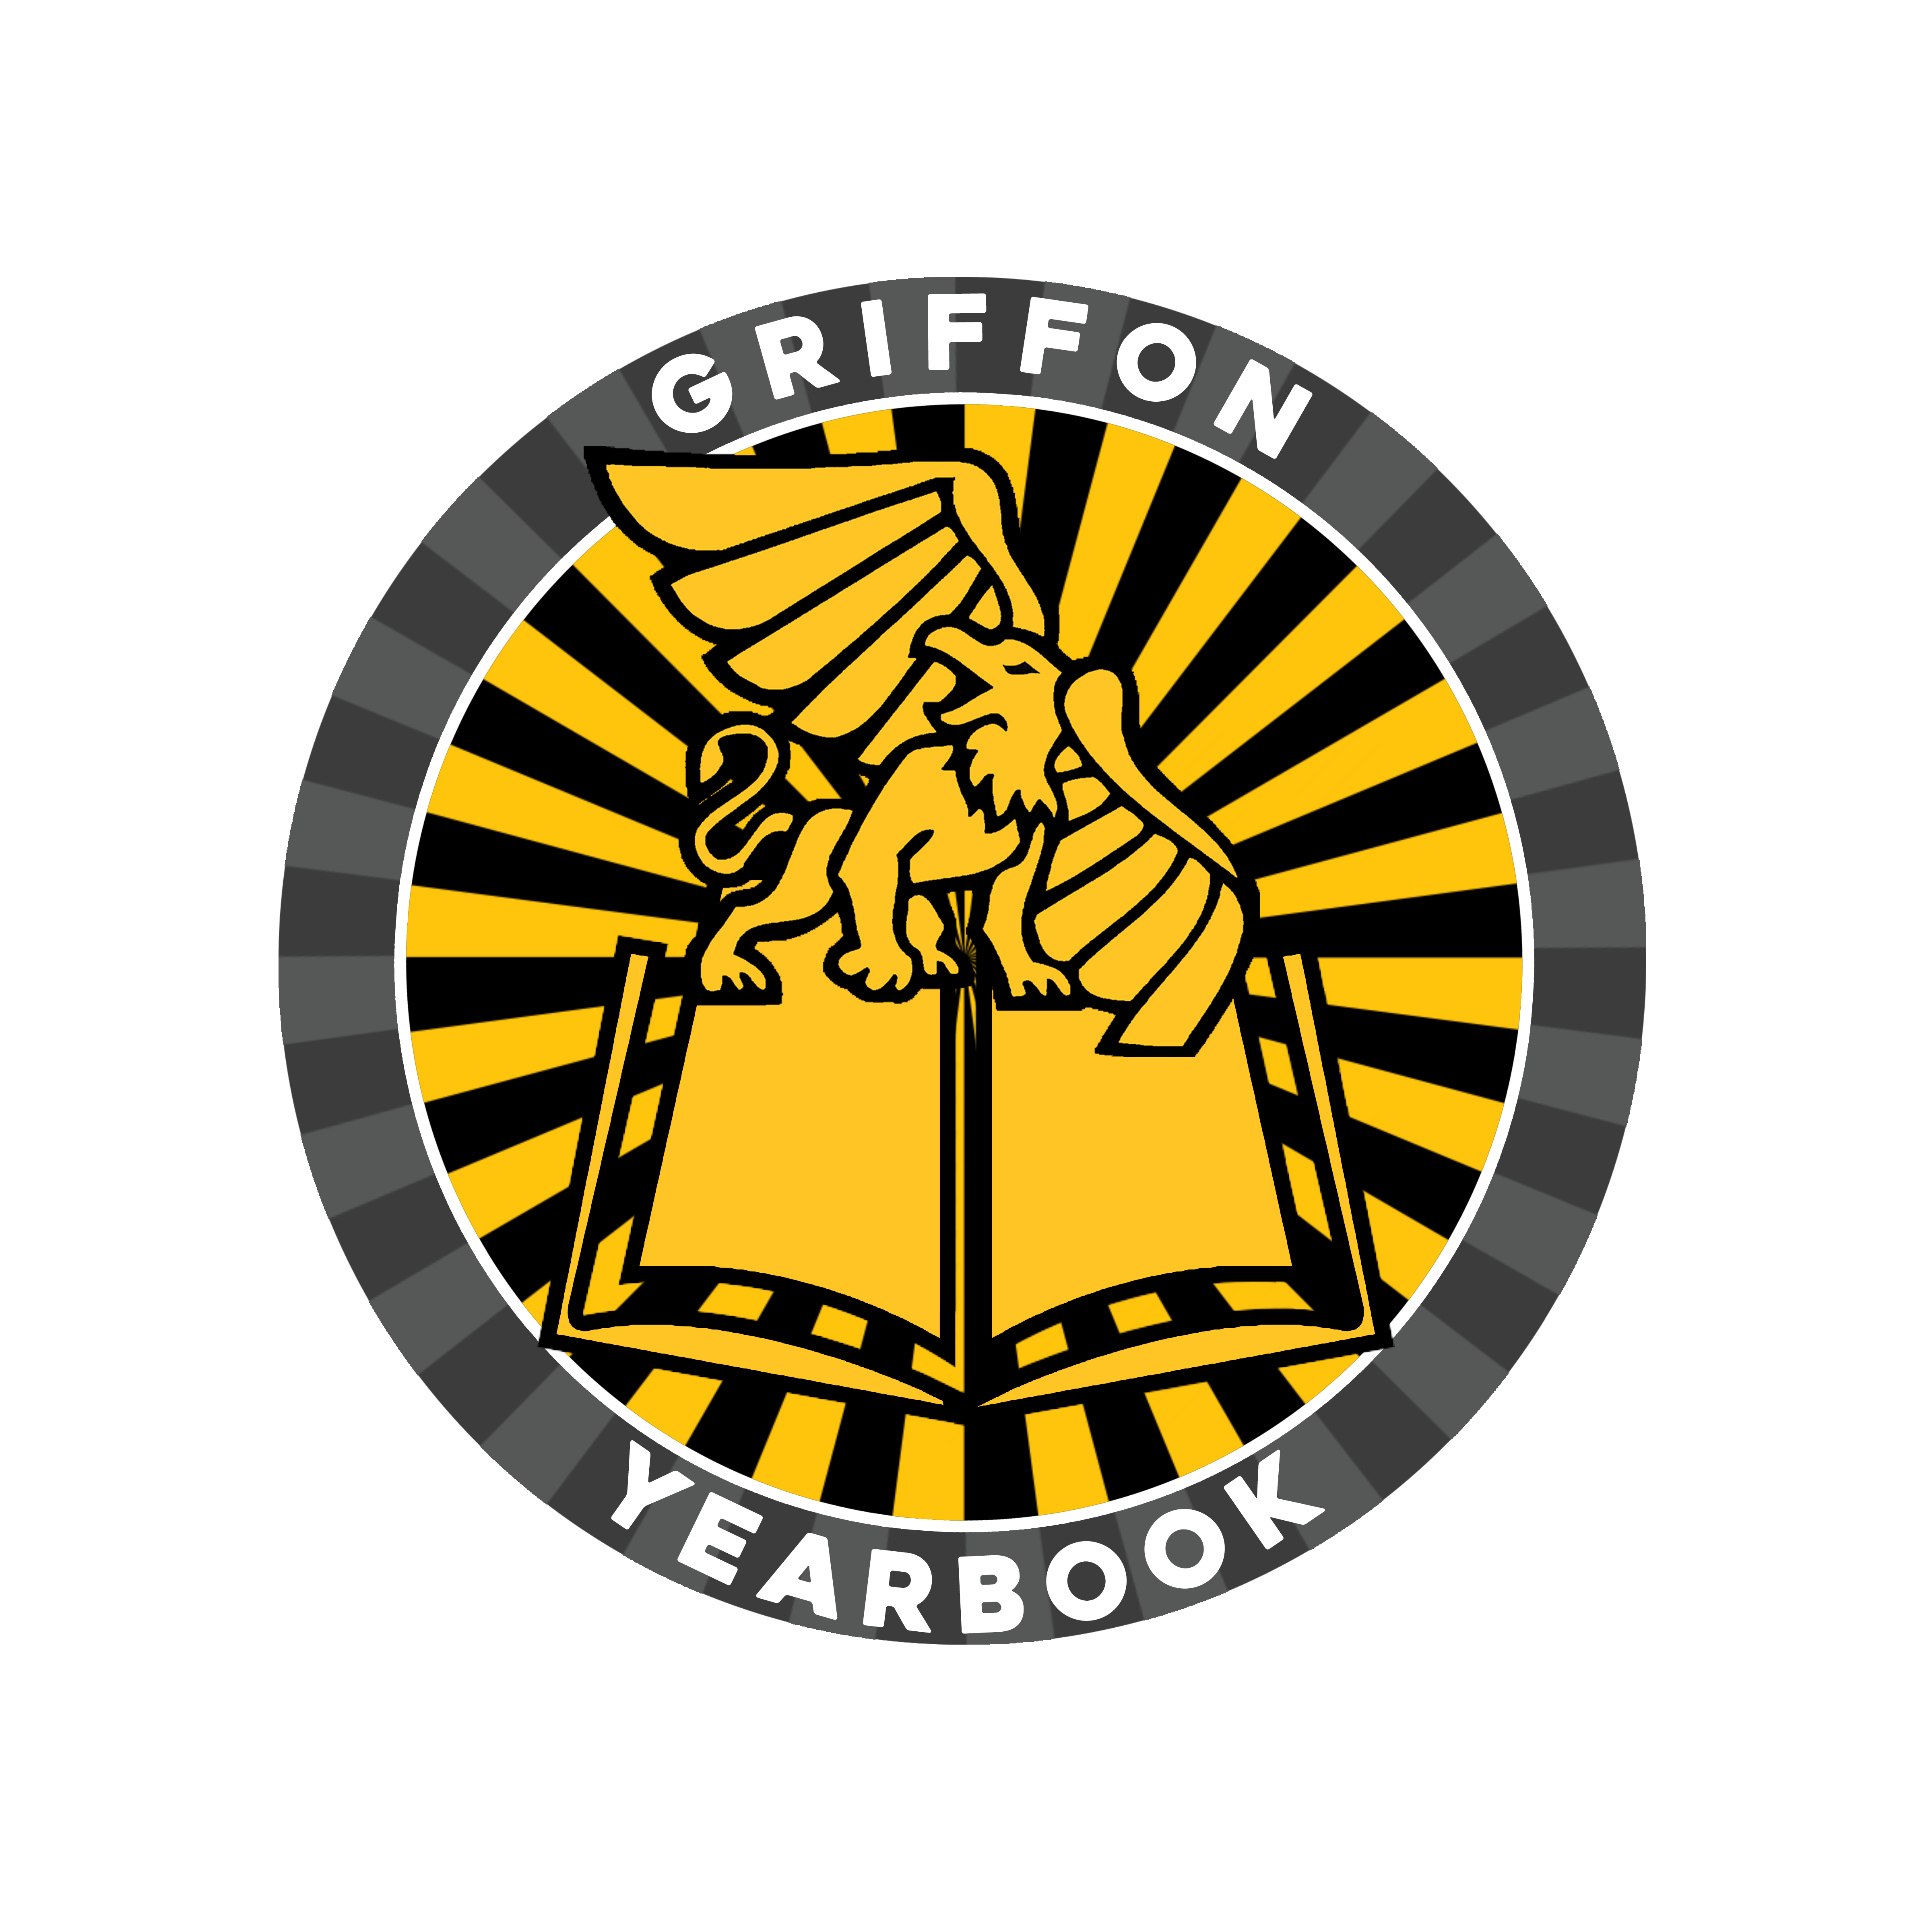 a logo of a griffon on top of a yearbook